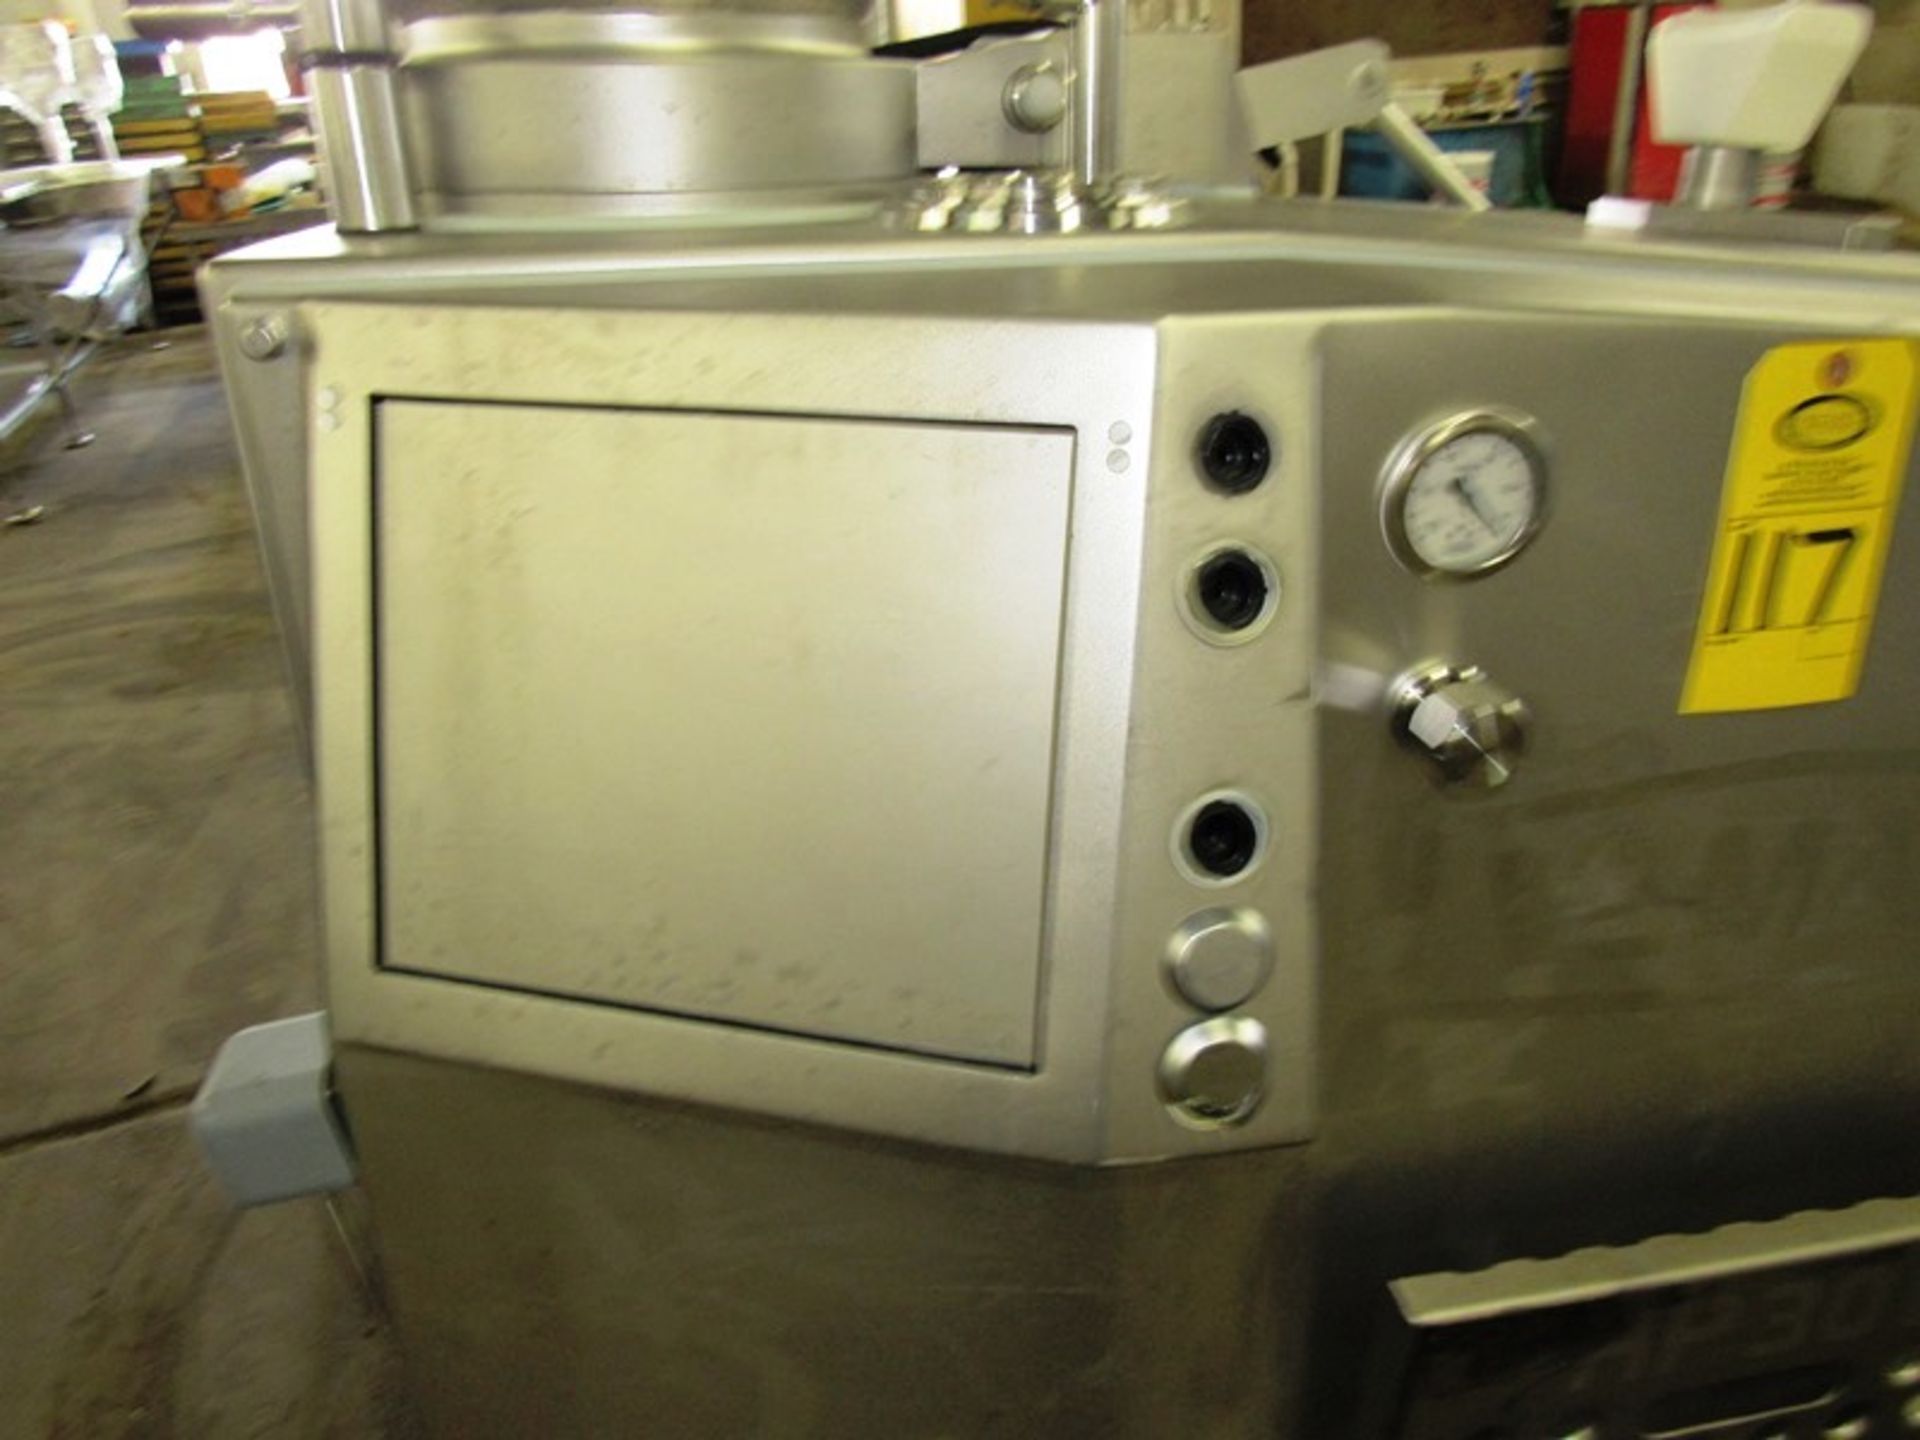 Vemag Mdl. HP30E Continuous Vacuum Filler with bucket lift, Ser. #166305, missing screws & - Image 7 of 16